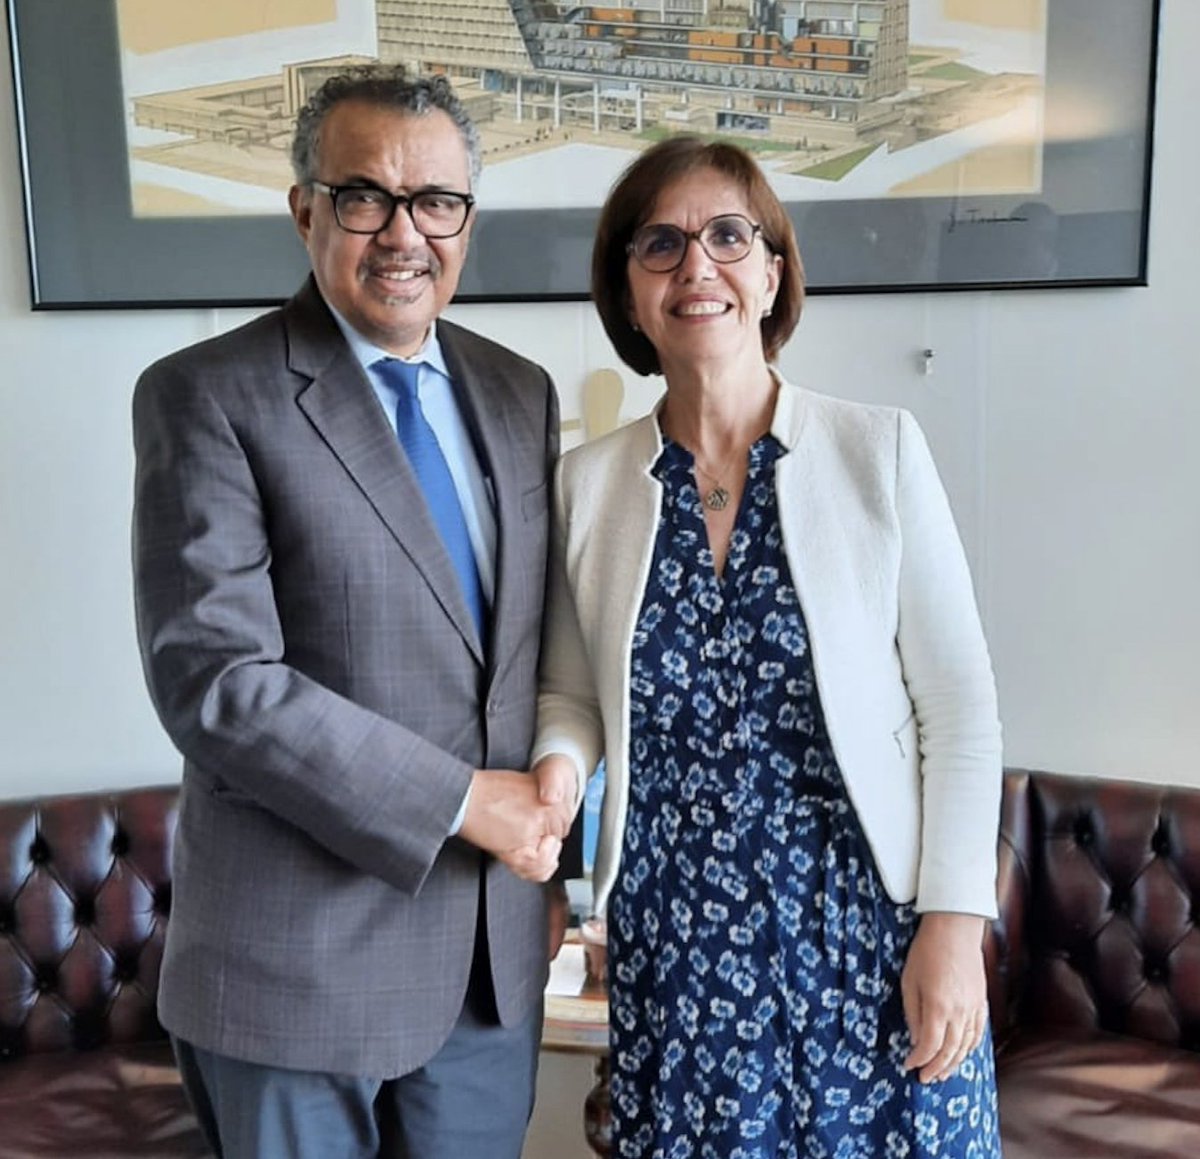 Insightful discussions with @DrTedros Adhanom Ghebreyesus, Director-General of @WHO, highlighted the necessity of addressing #AnimalHealth to make the world safer from pandemics, antimicrobial resistance, and food borne diseases.